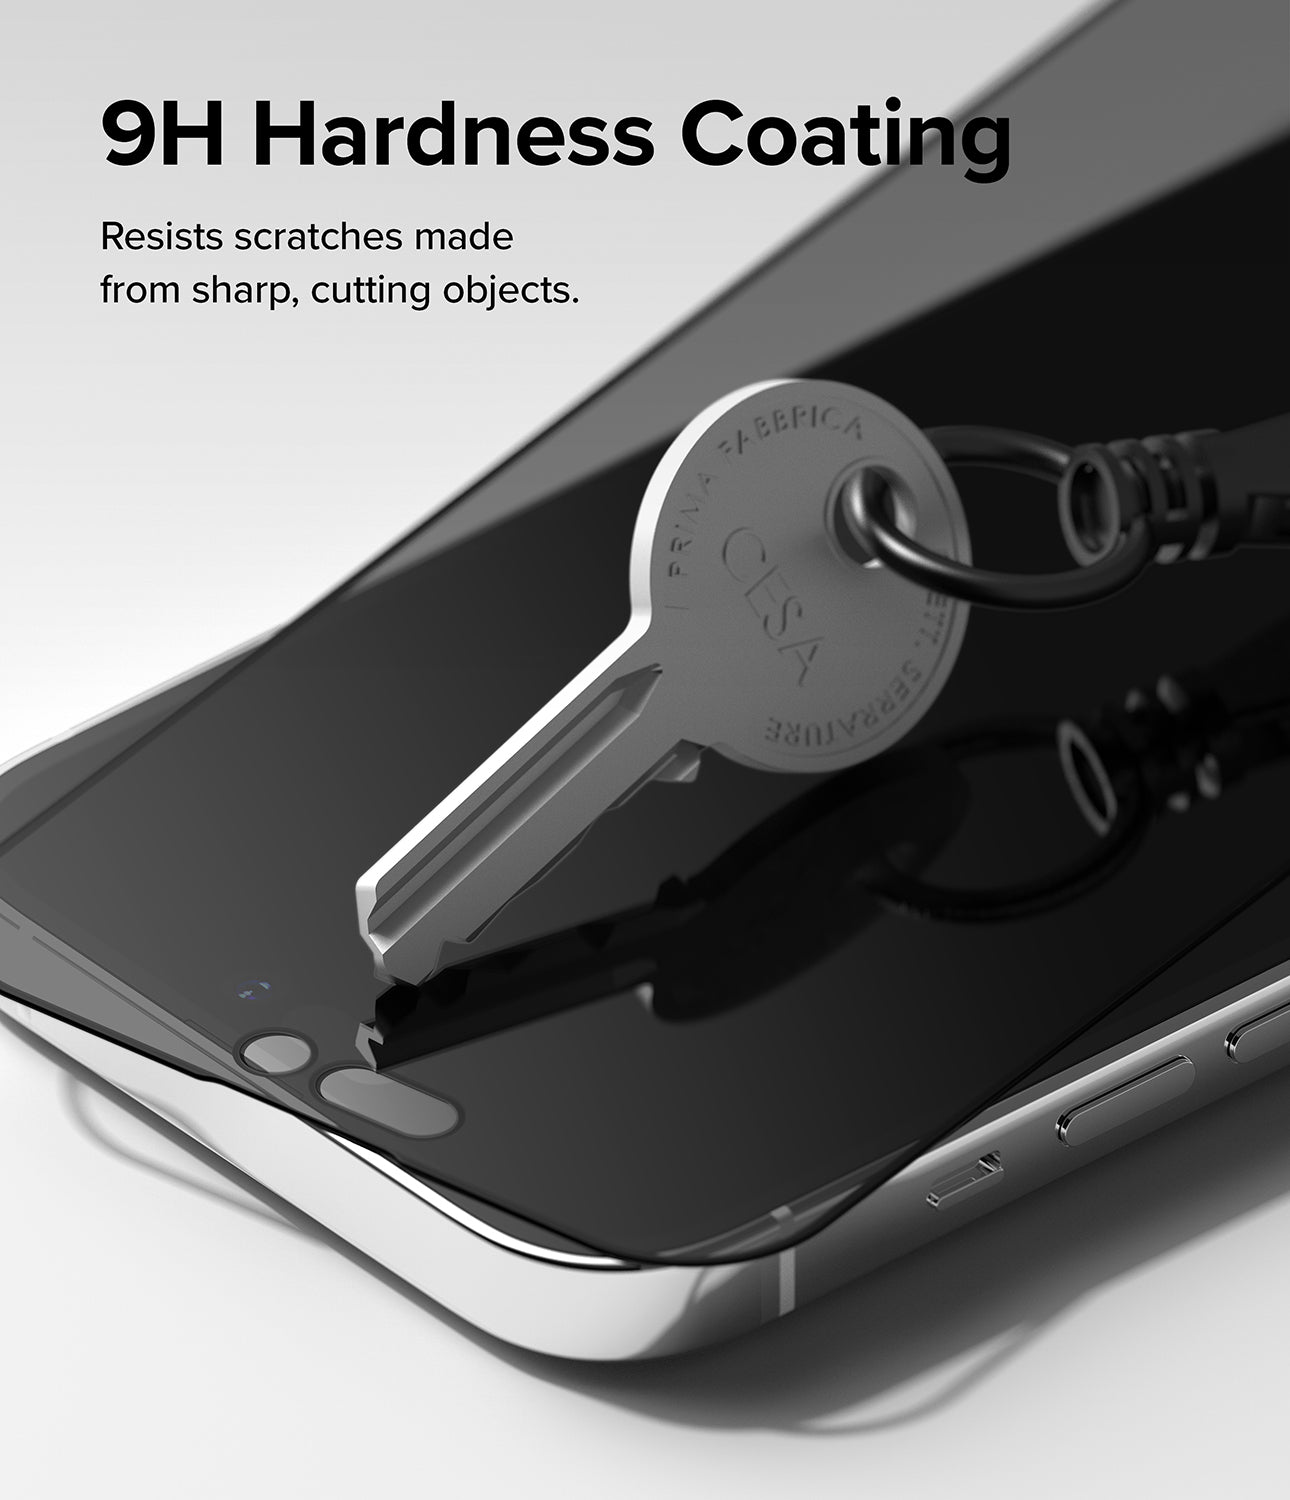 iPhone 14 Pro Max Screen Protector | Privacy Glass - 9H Hardness Coating. Resists scratches made from sharp, cutting objects.